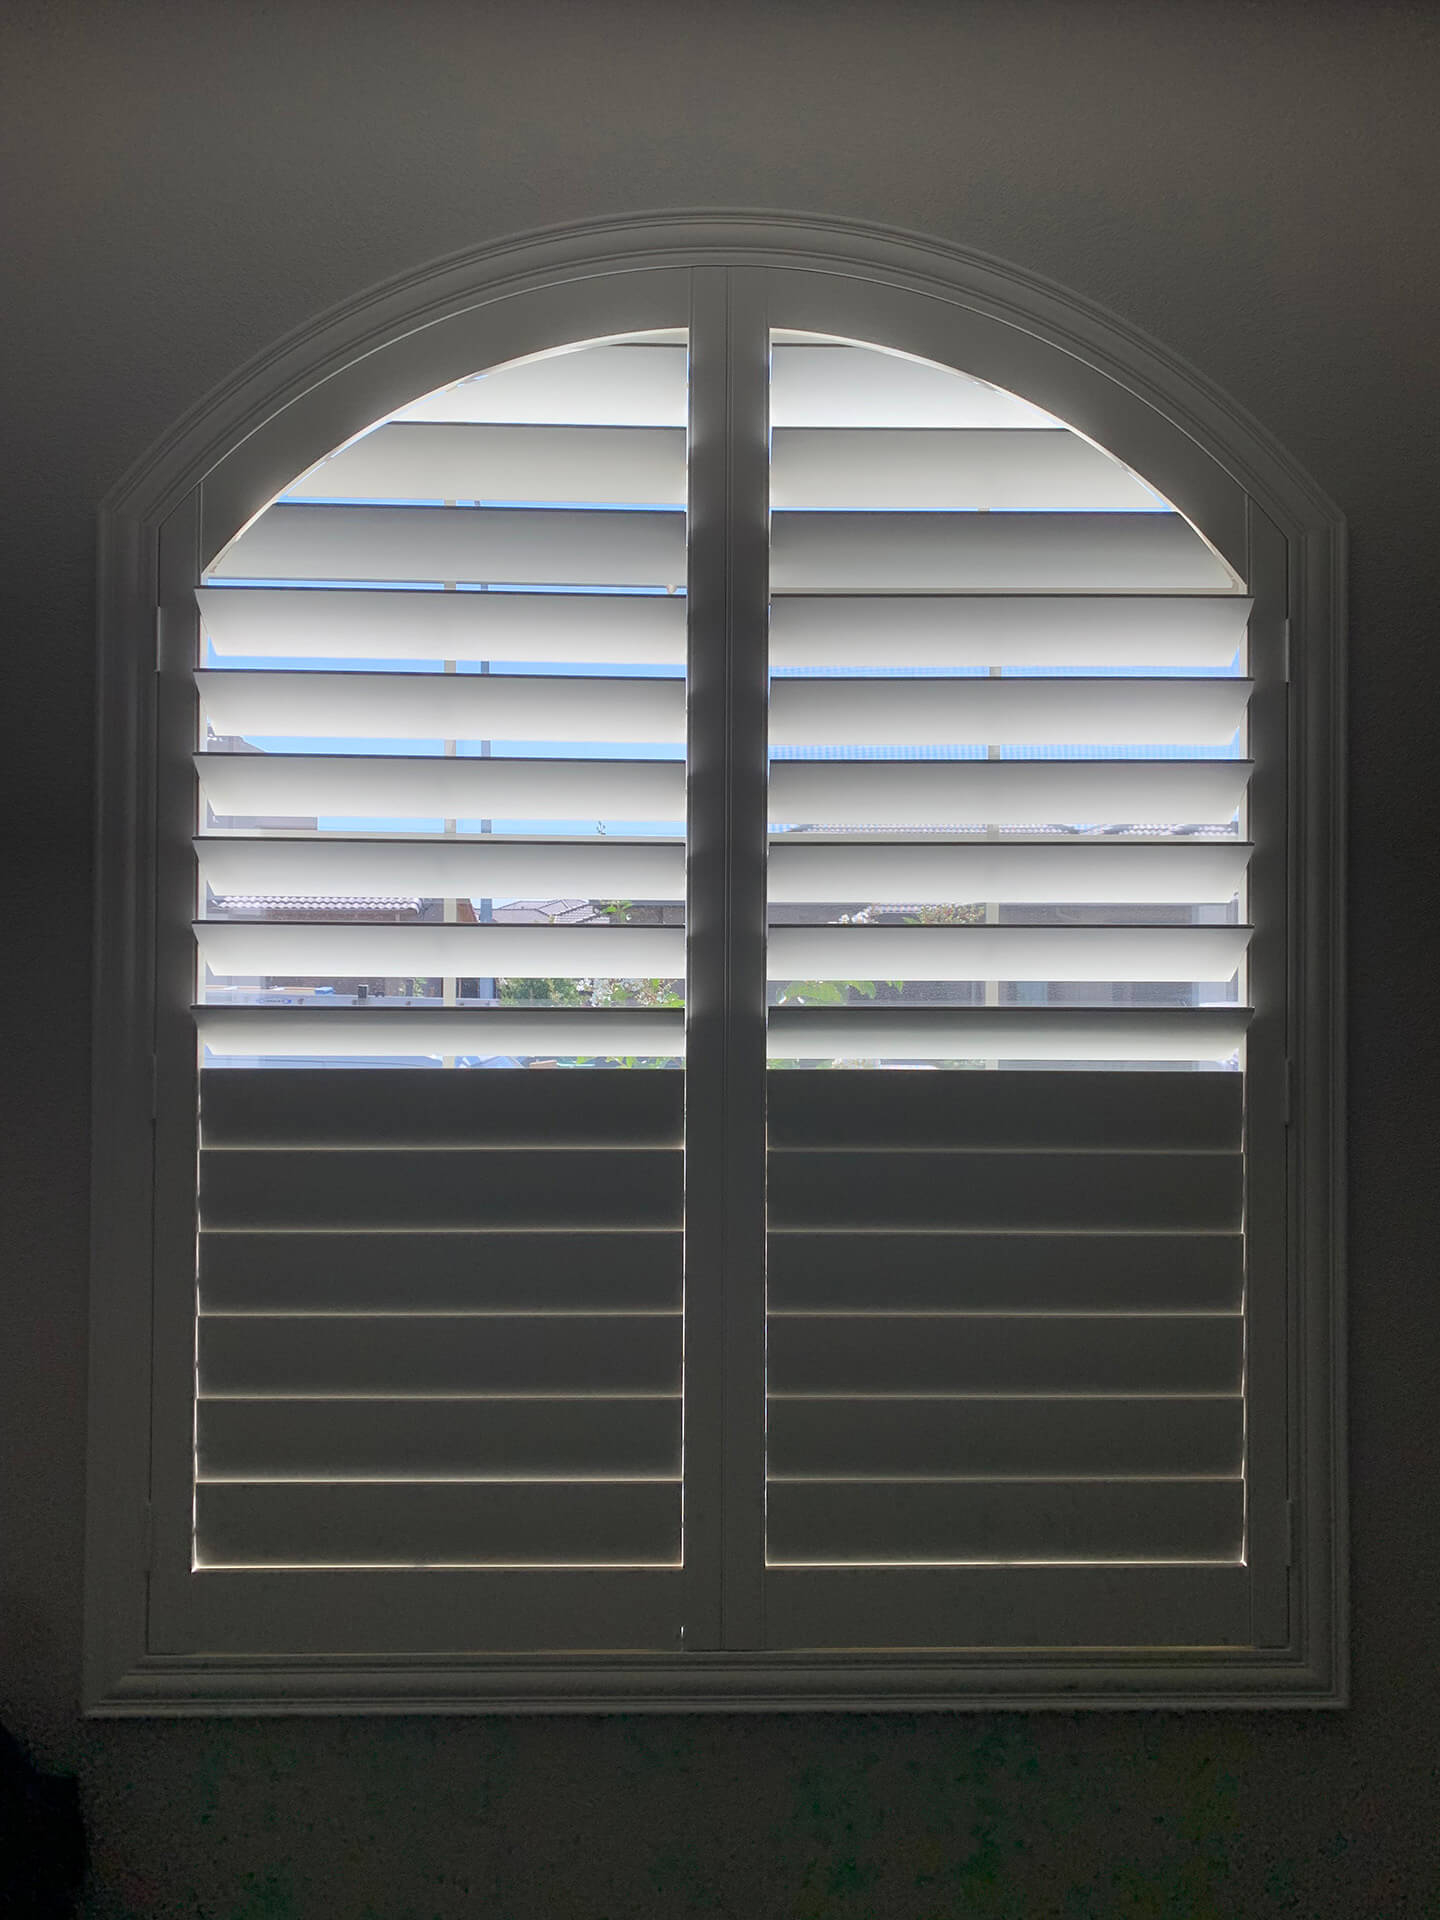 A single arched window completely covered with shutters.